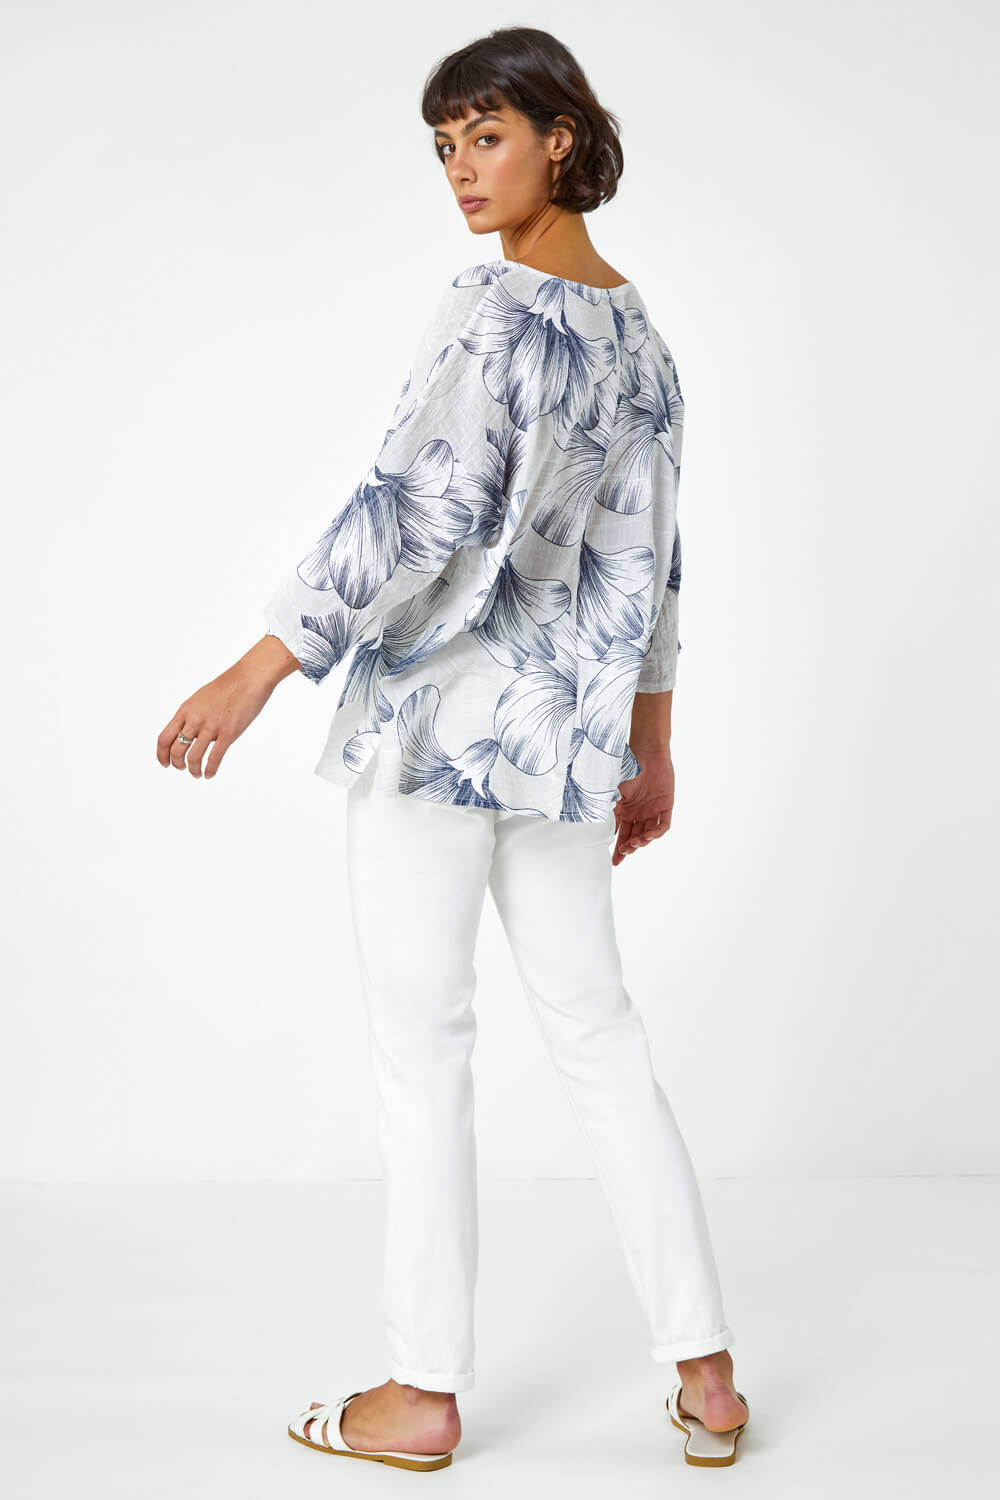 Grey Floral Print Cotton Tunic Top, Image 3 of 5